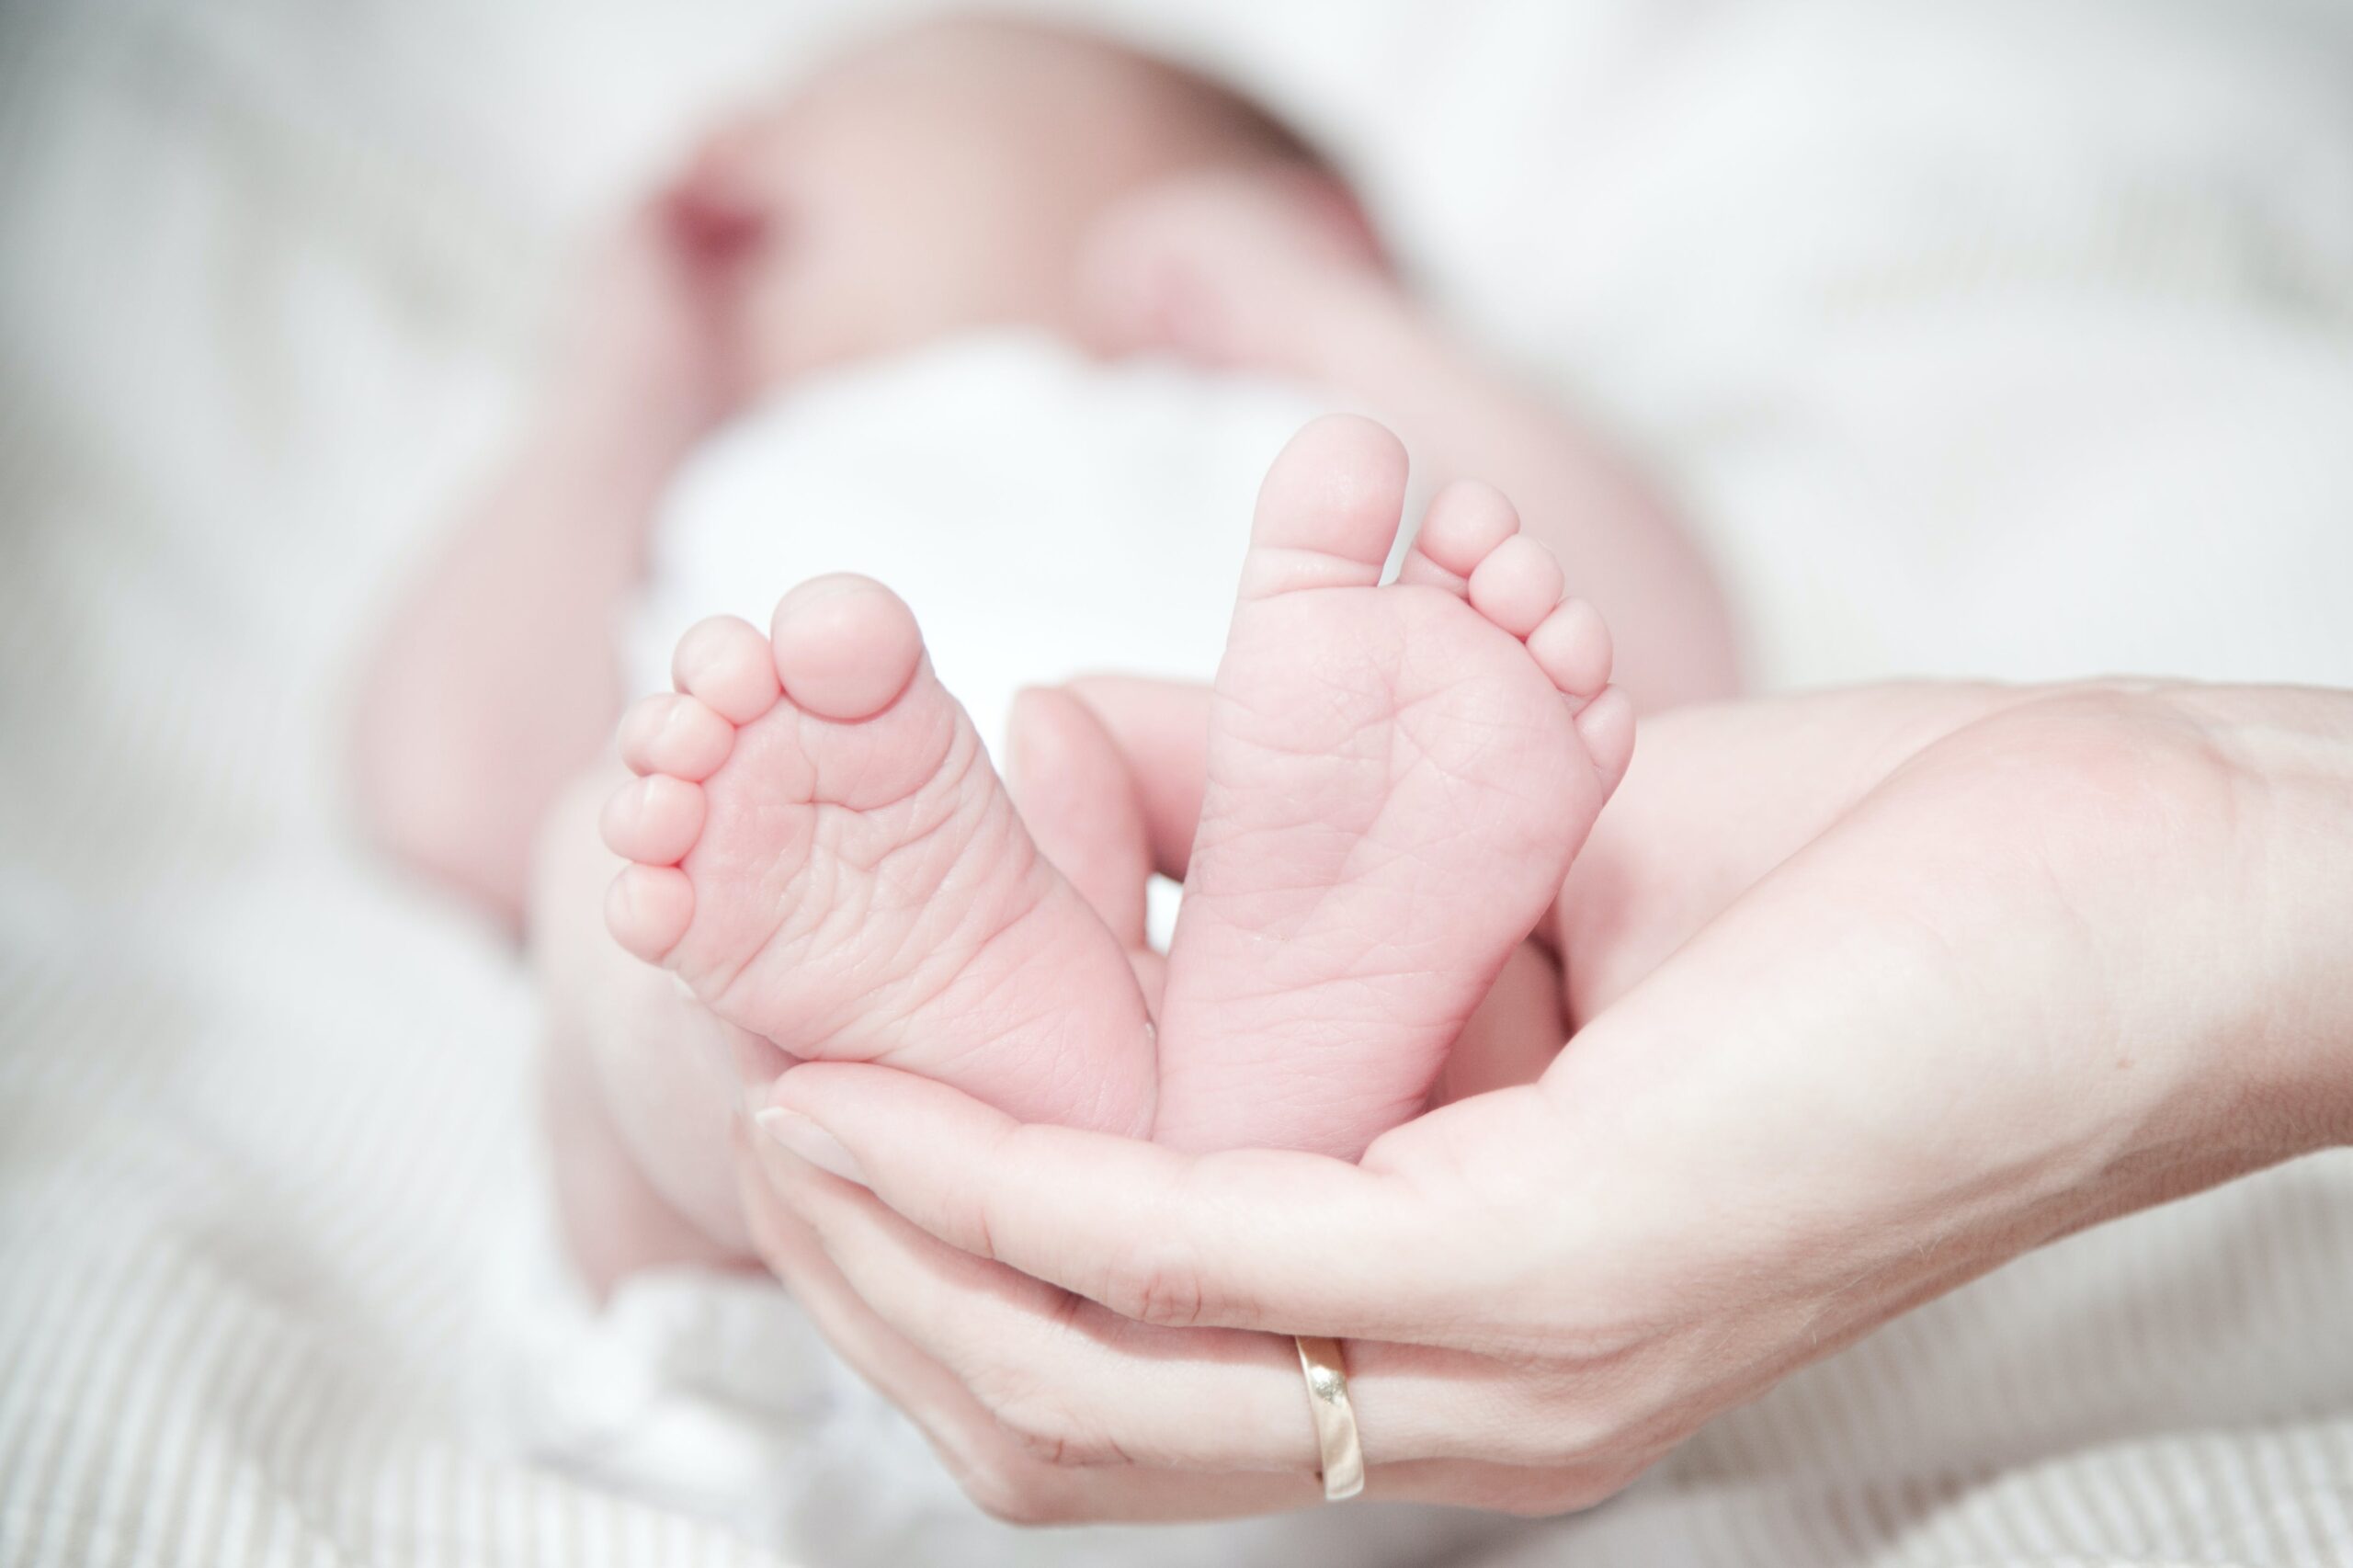 Newborn Baby Care During Winter: Nurturing Your Little One in the Cold Months